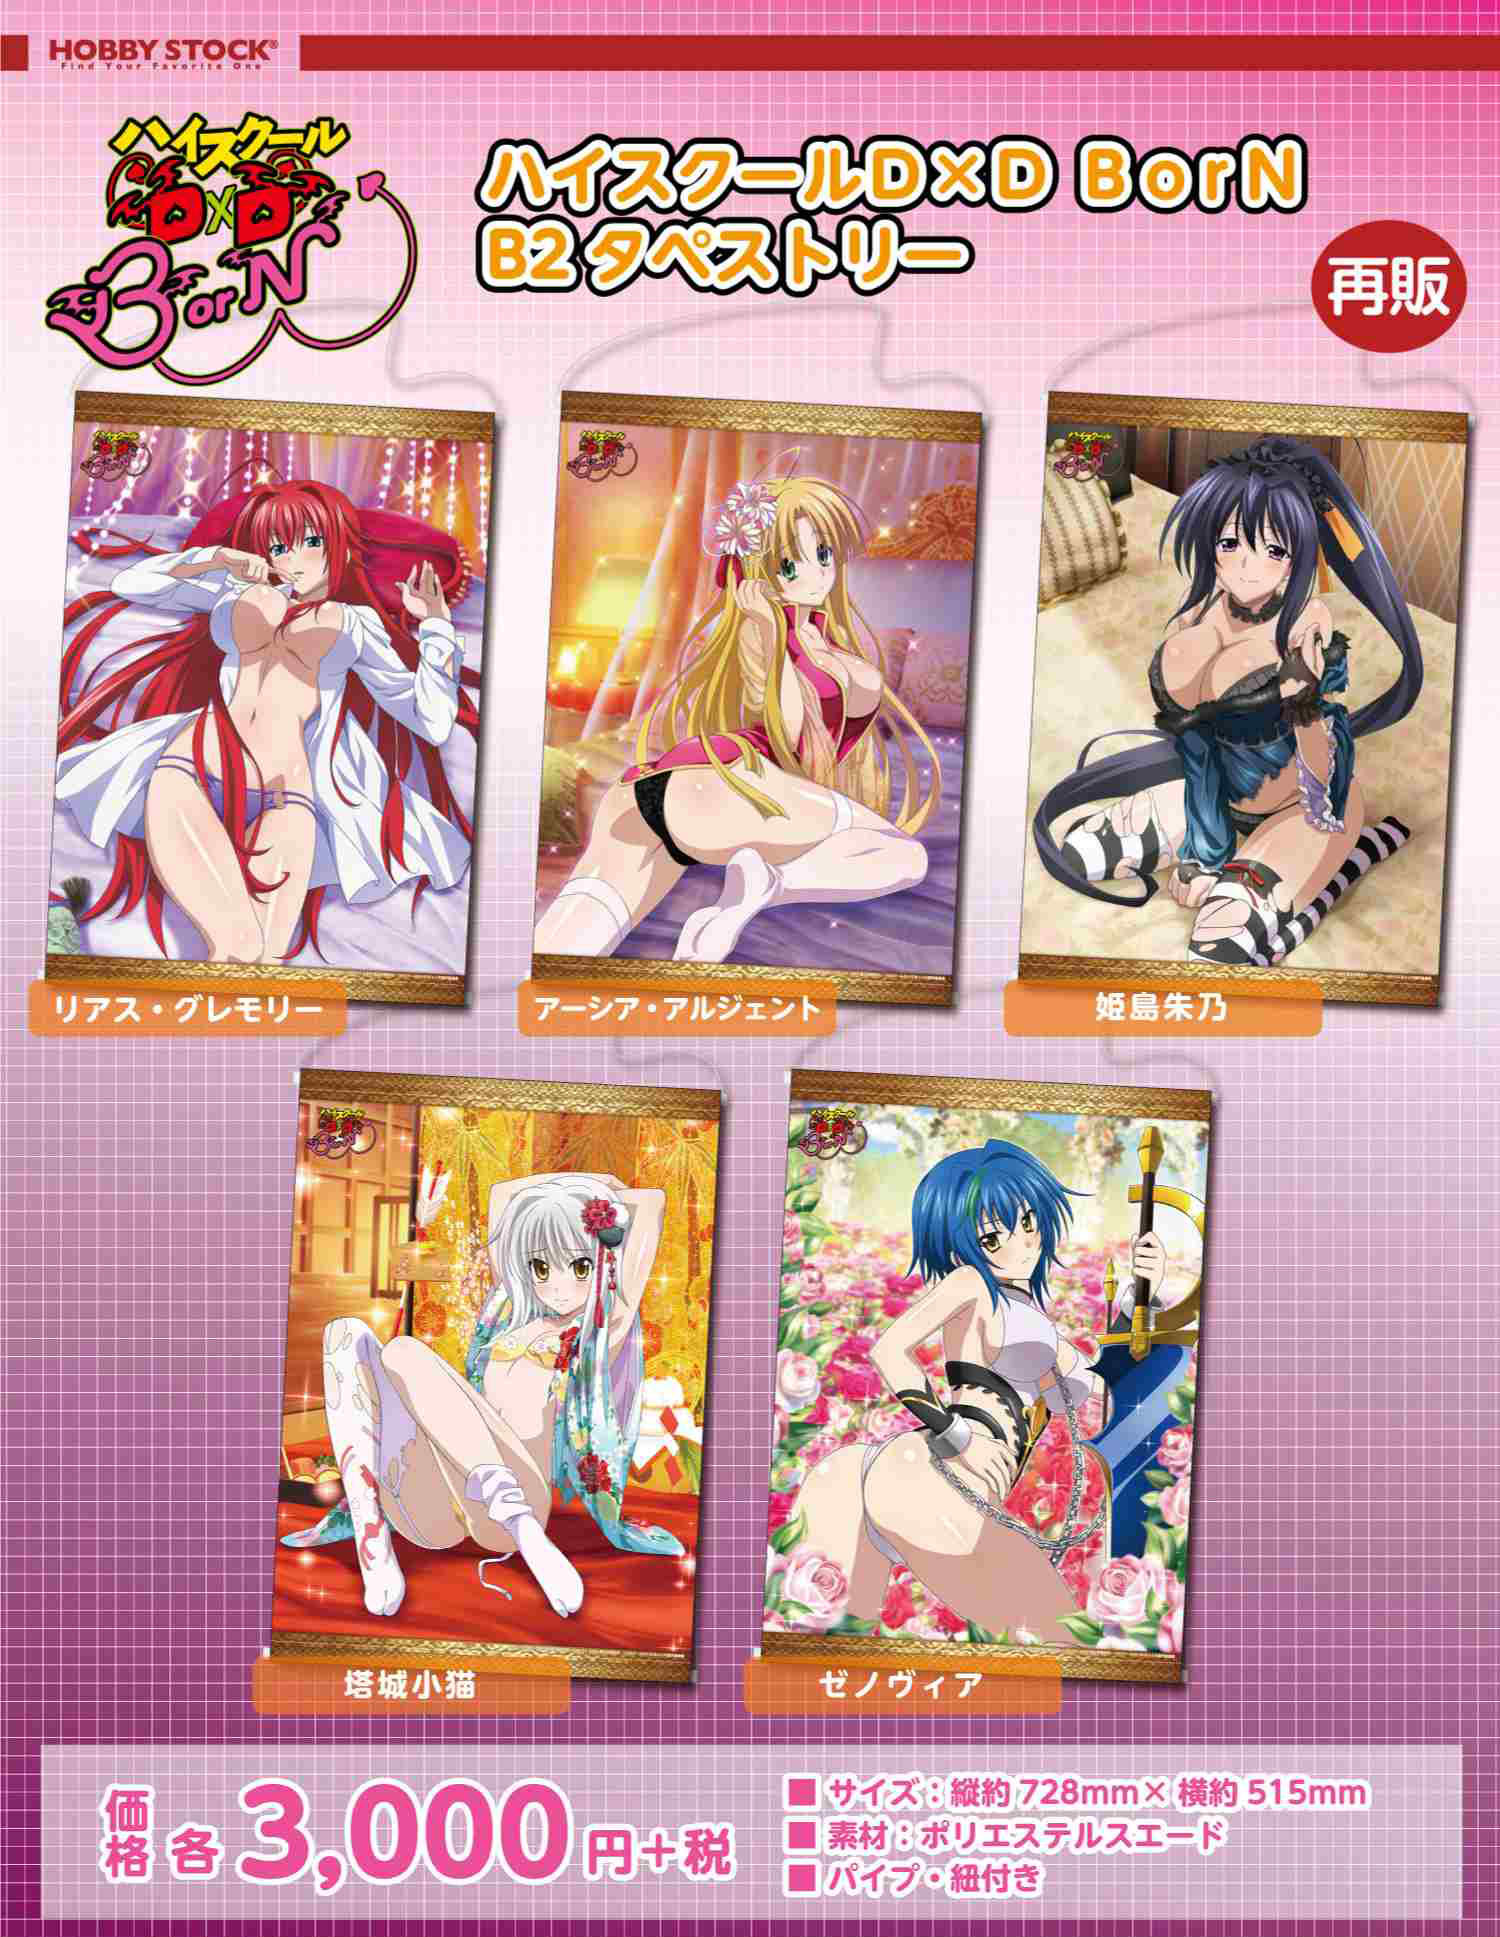 Resale High School Dxd Born B2 Tapestry Milestone Inc Group Set Product Detail Information